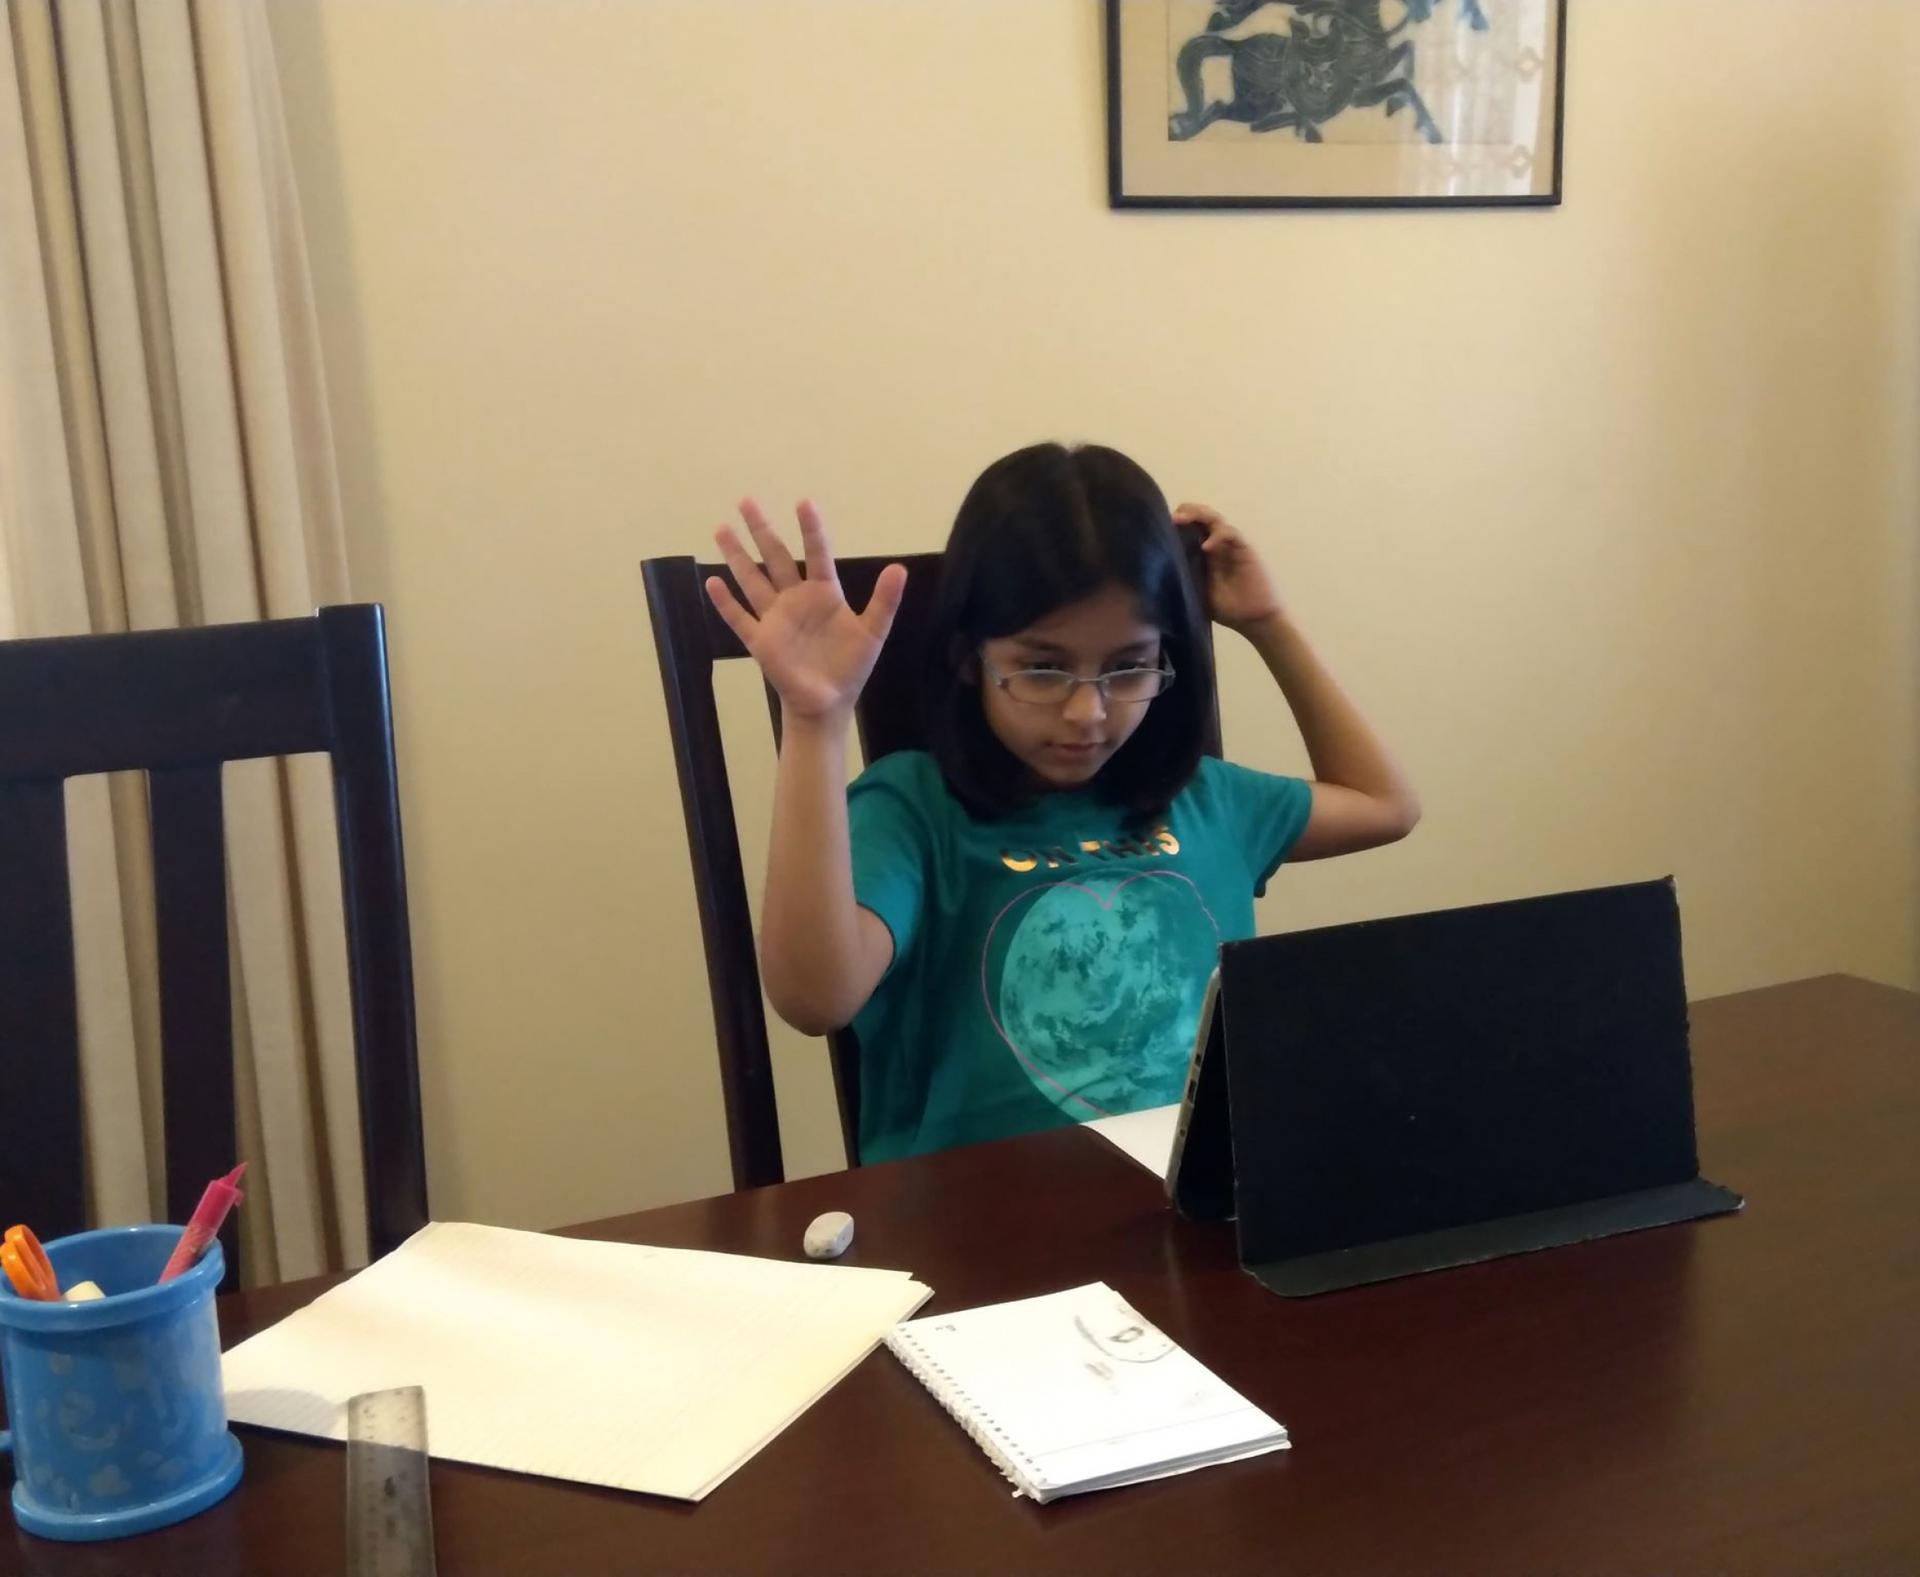 Farah Husain of Karachi, Pakistan, participates in her online school lesson from home.